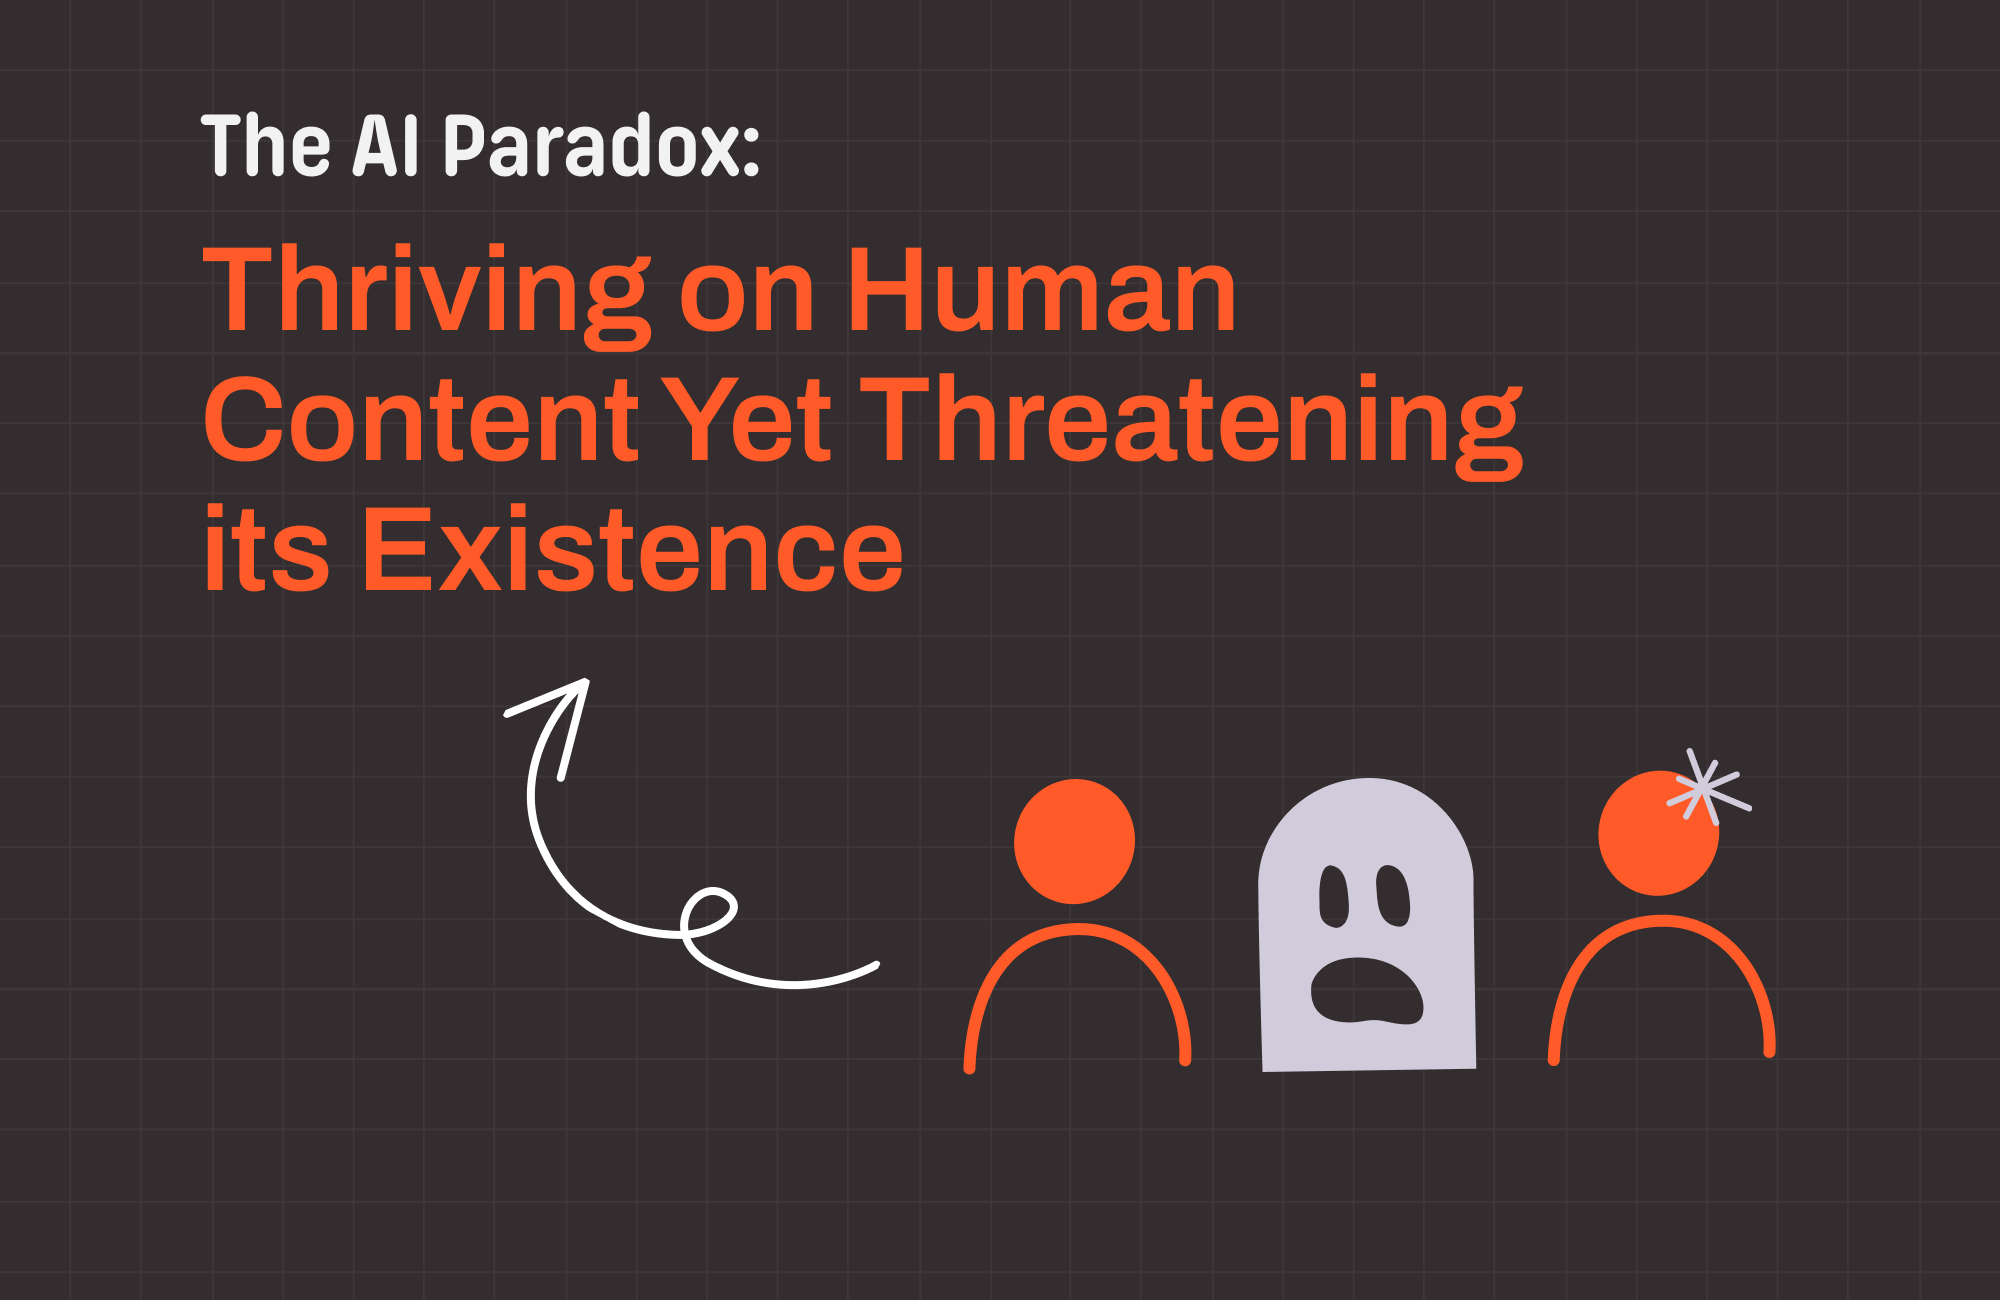 The AI Paradox: Thriving on Human Content Yet Threatening its Existence